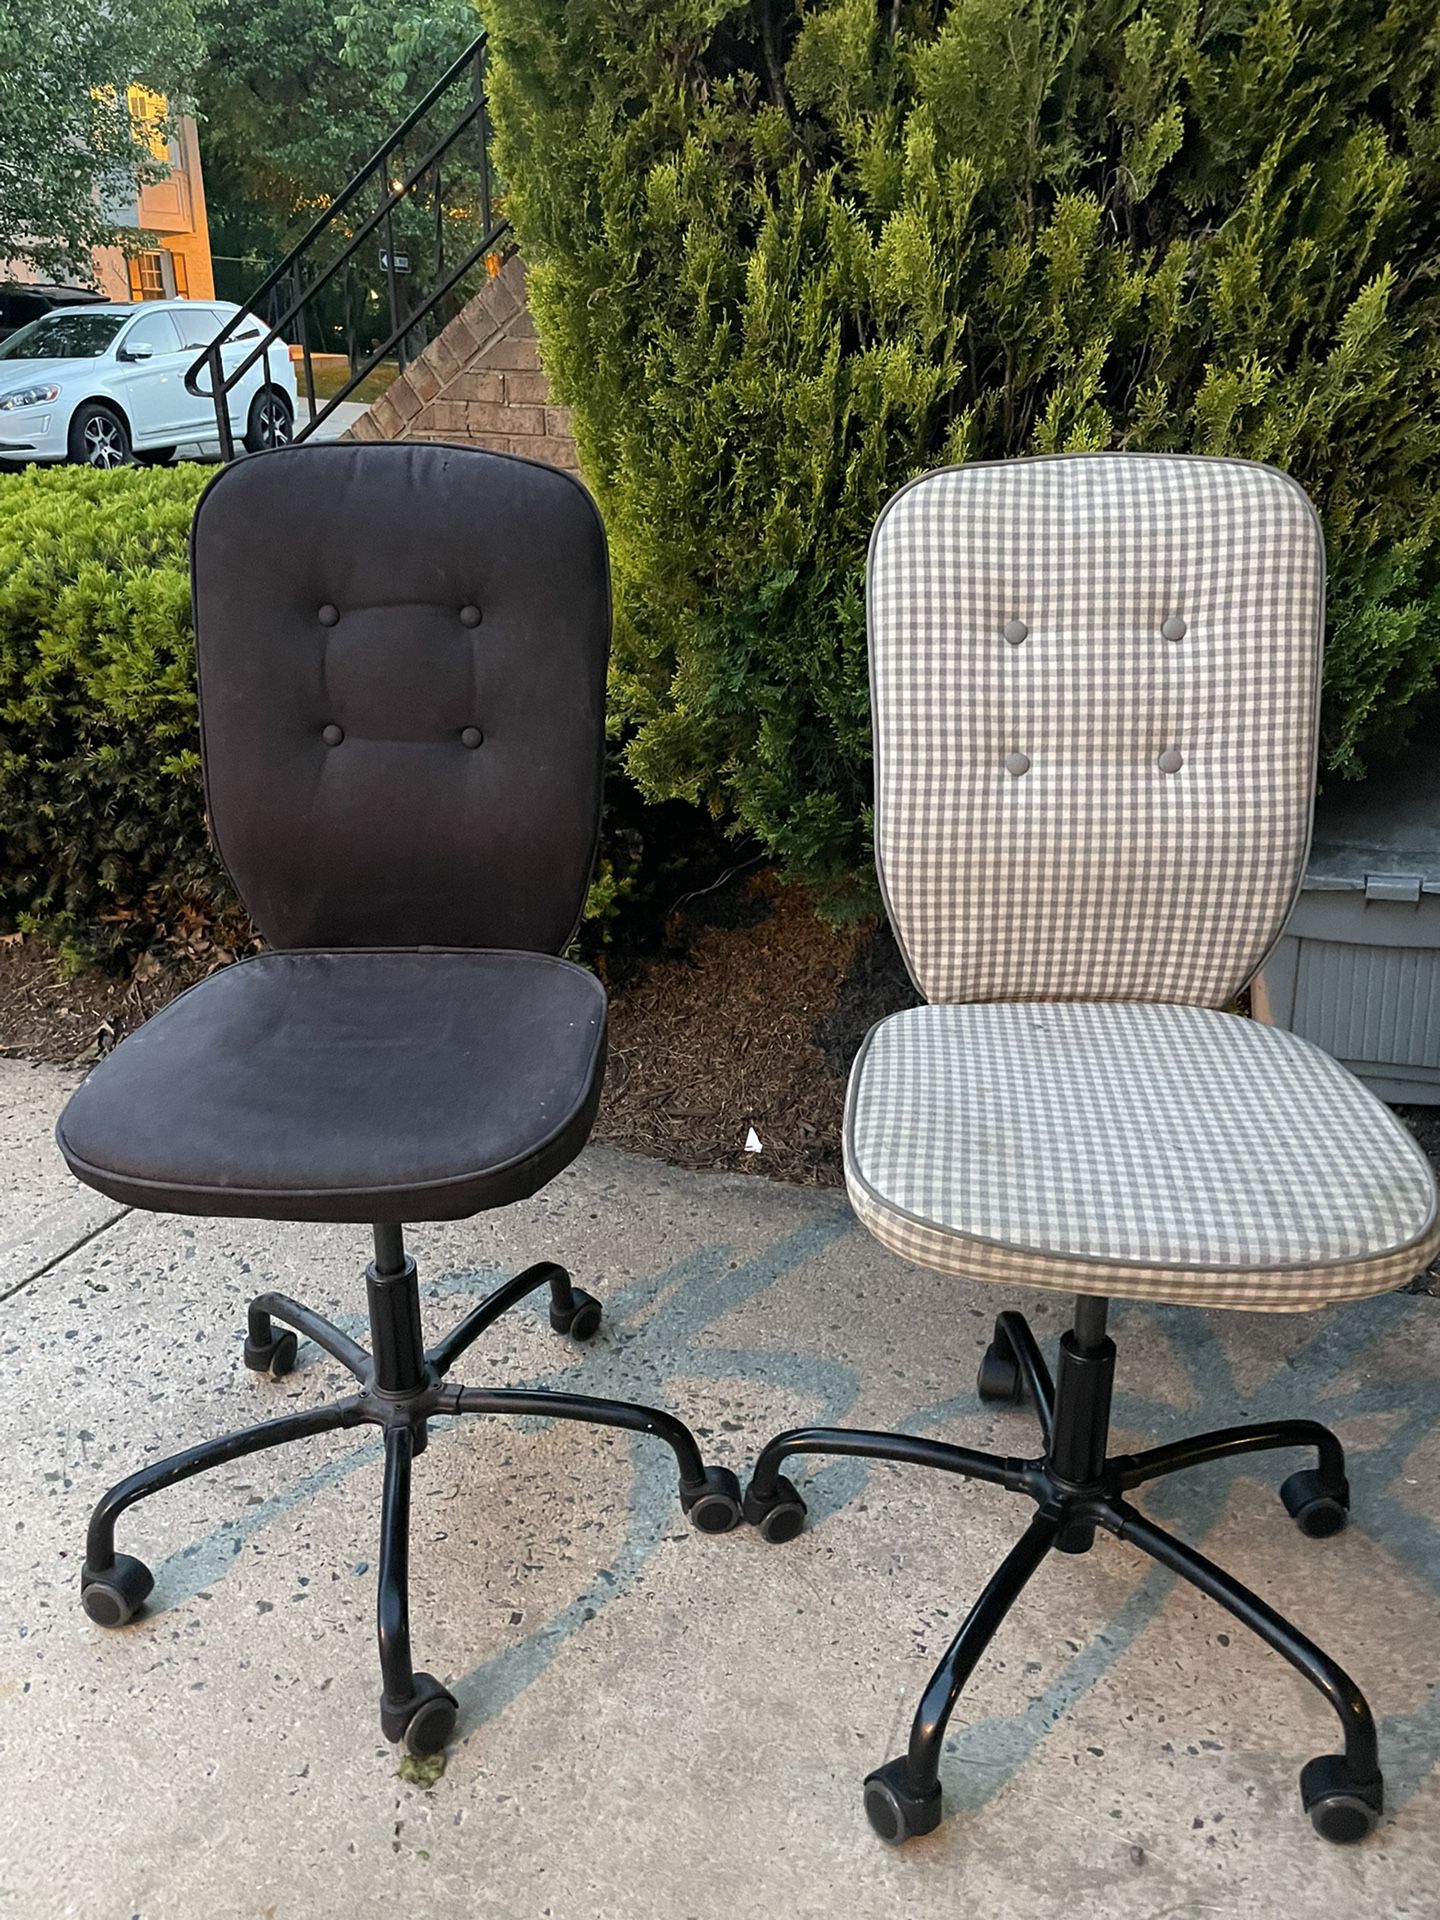 3 chairs 